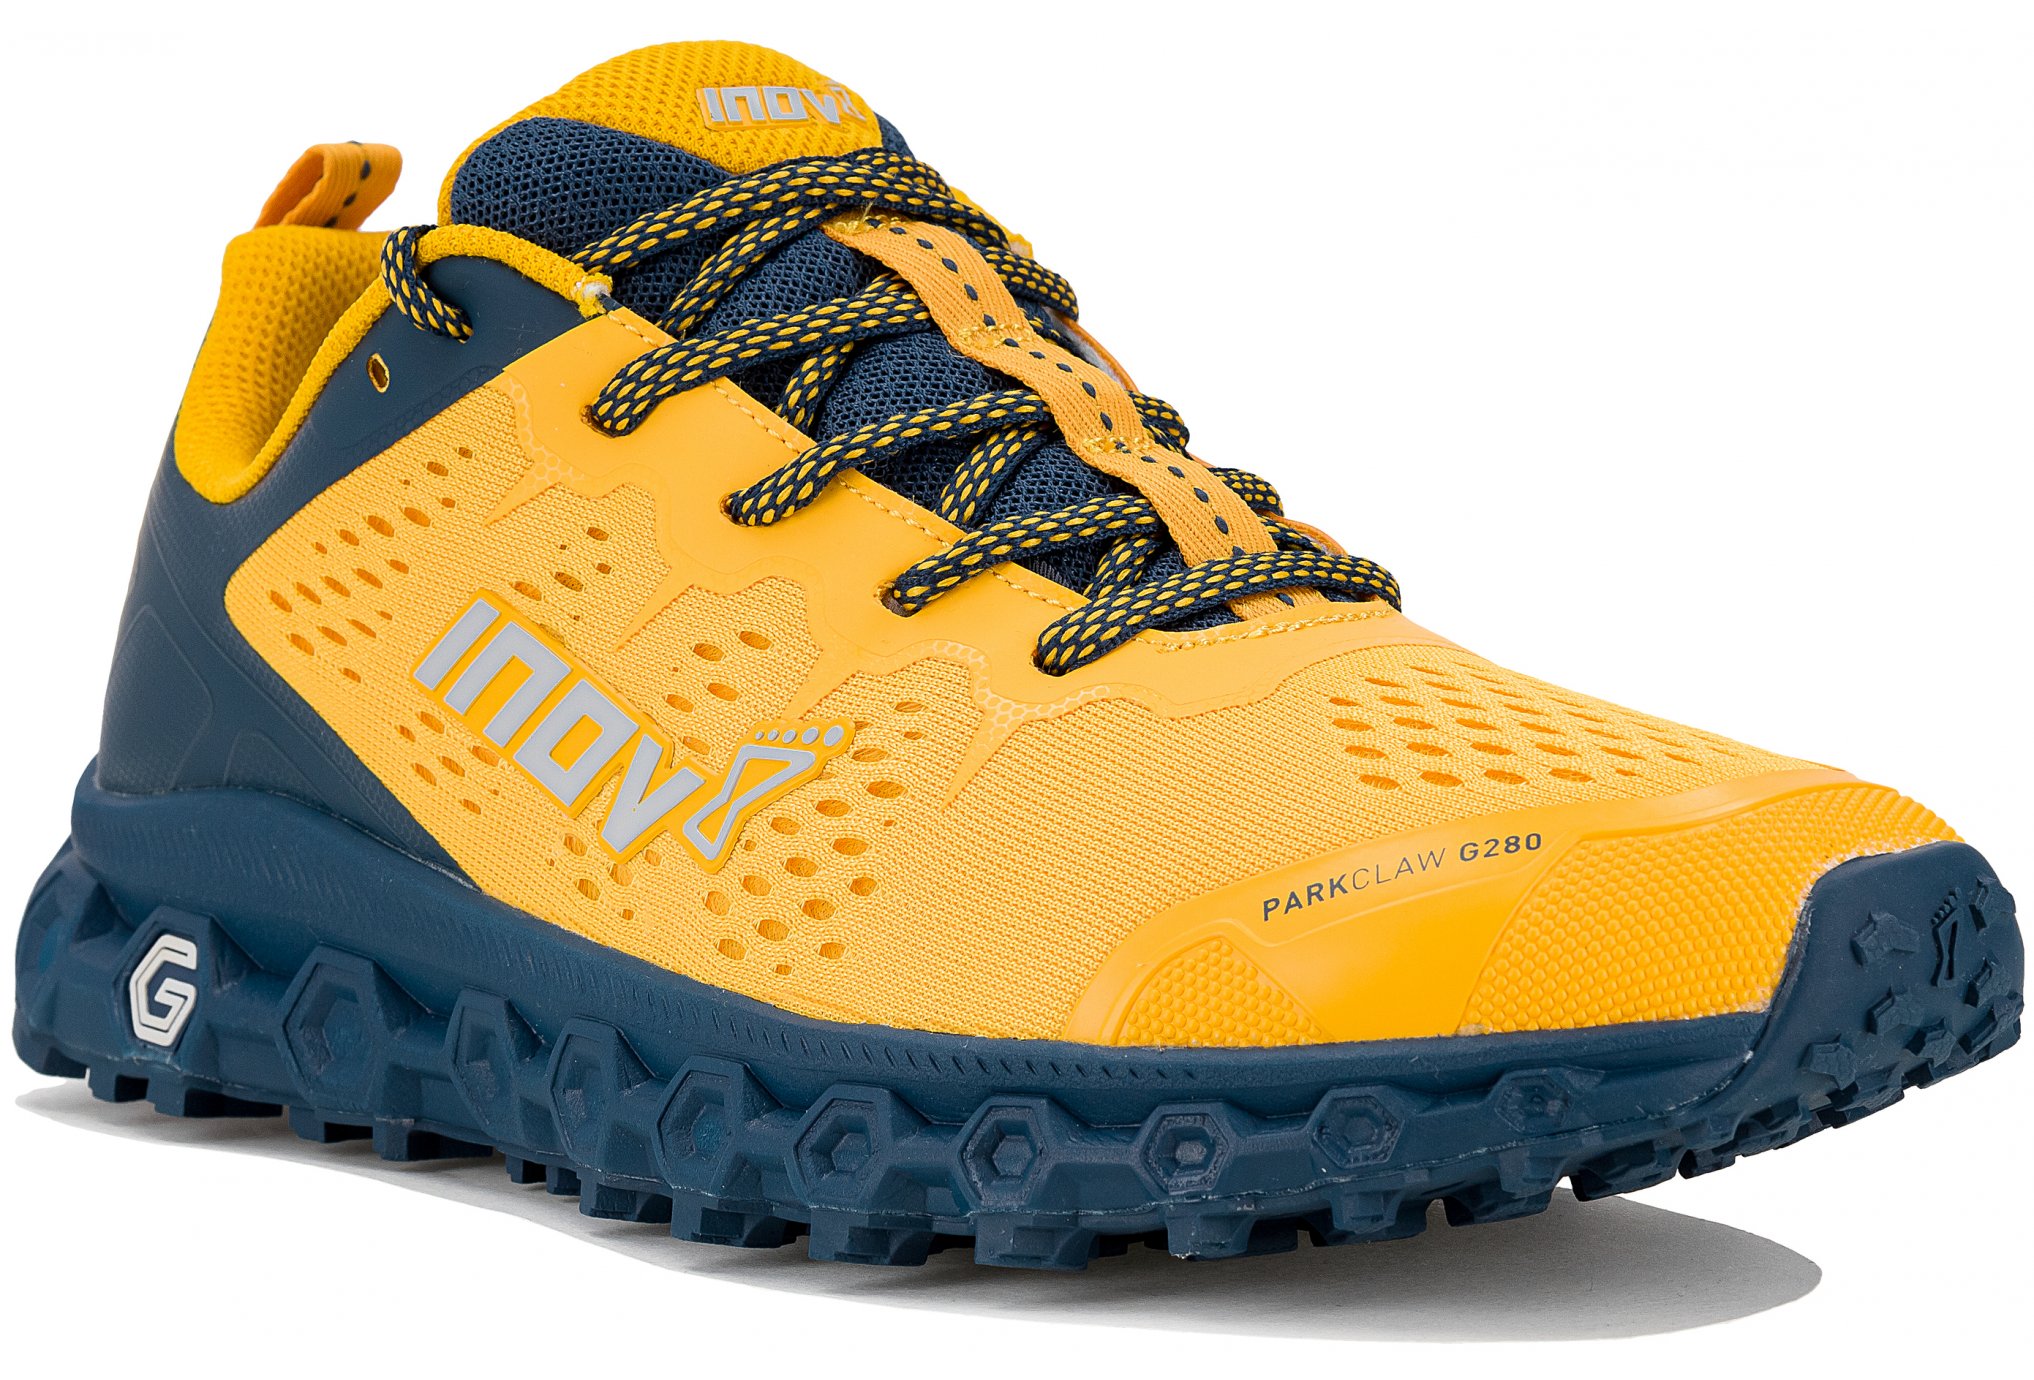 Inov-8 Parkclaw G 280 M Chaussures homme